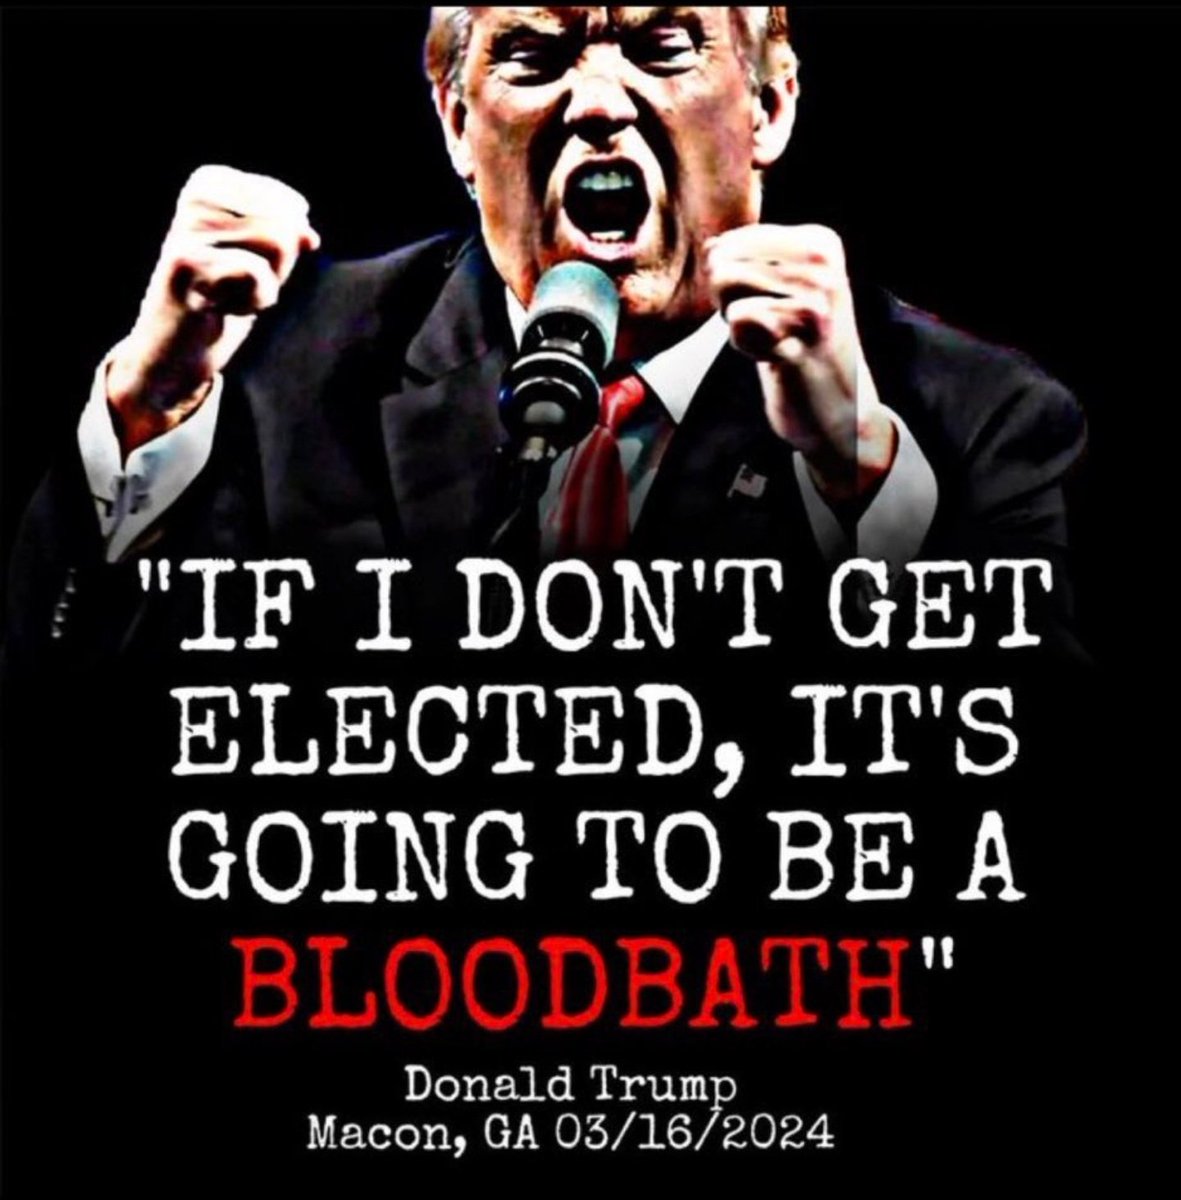 When you first heard Trump say this, what were your first thoughts? A). Nothing...he's just talking. B). Afraid. C). Sad. D). Angry as hell! E). It won't be our blood! F). _ _ _ _!